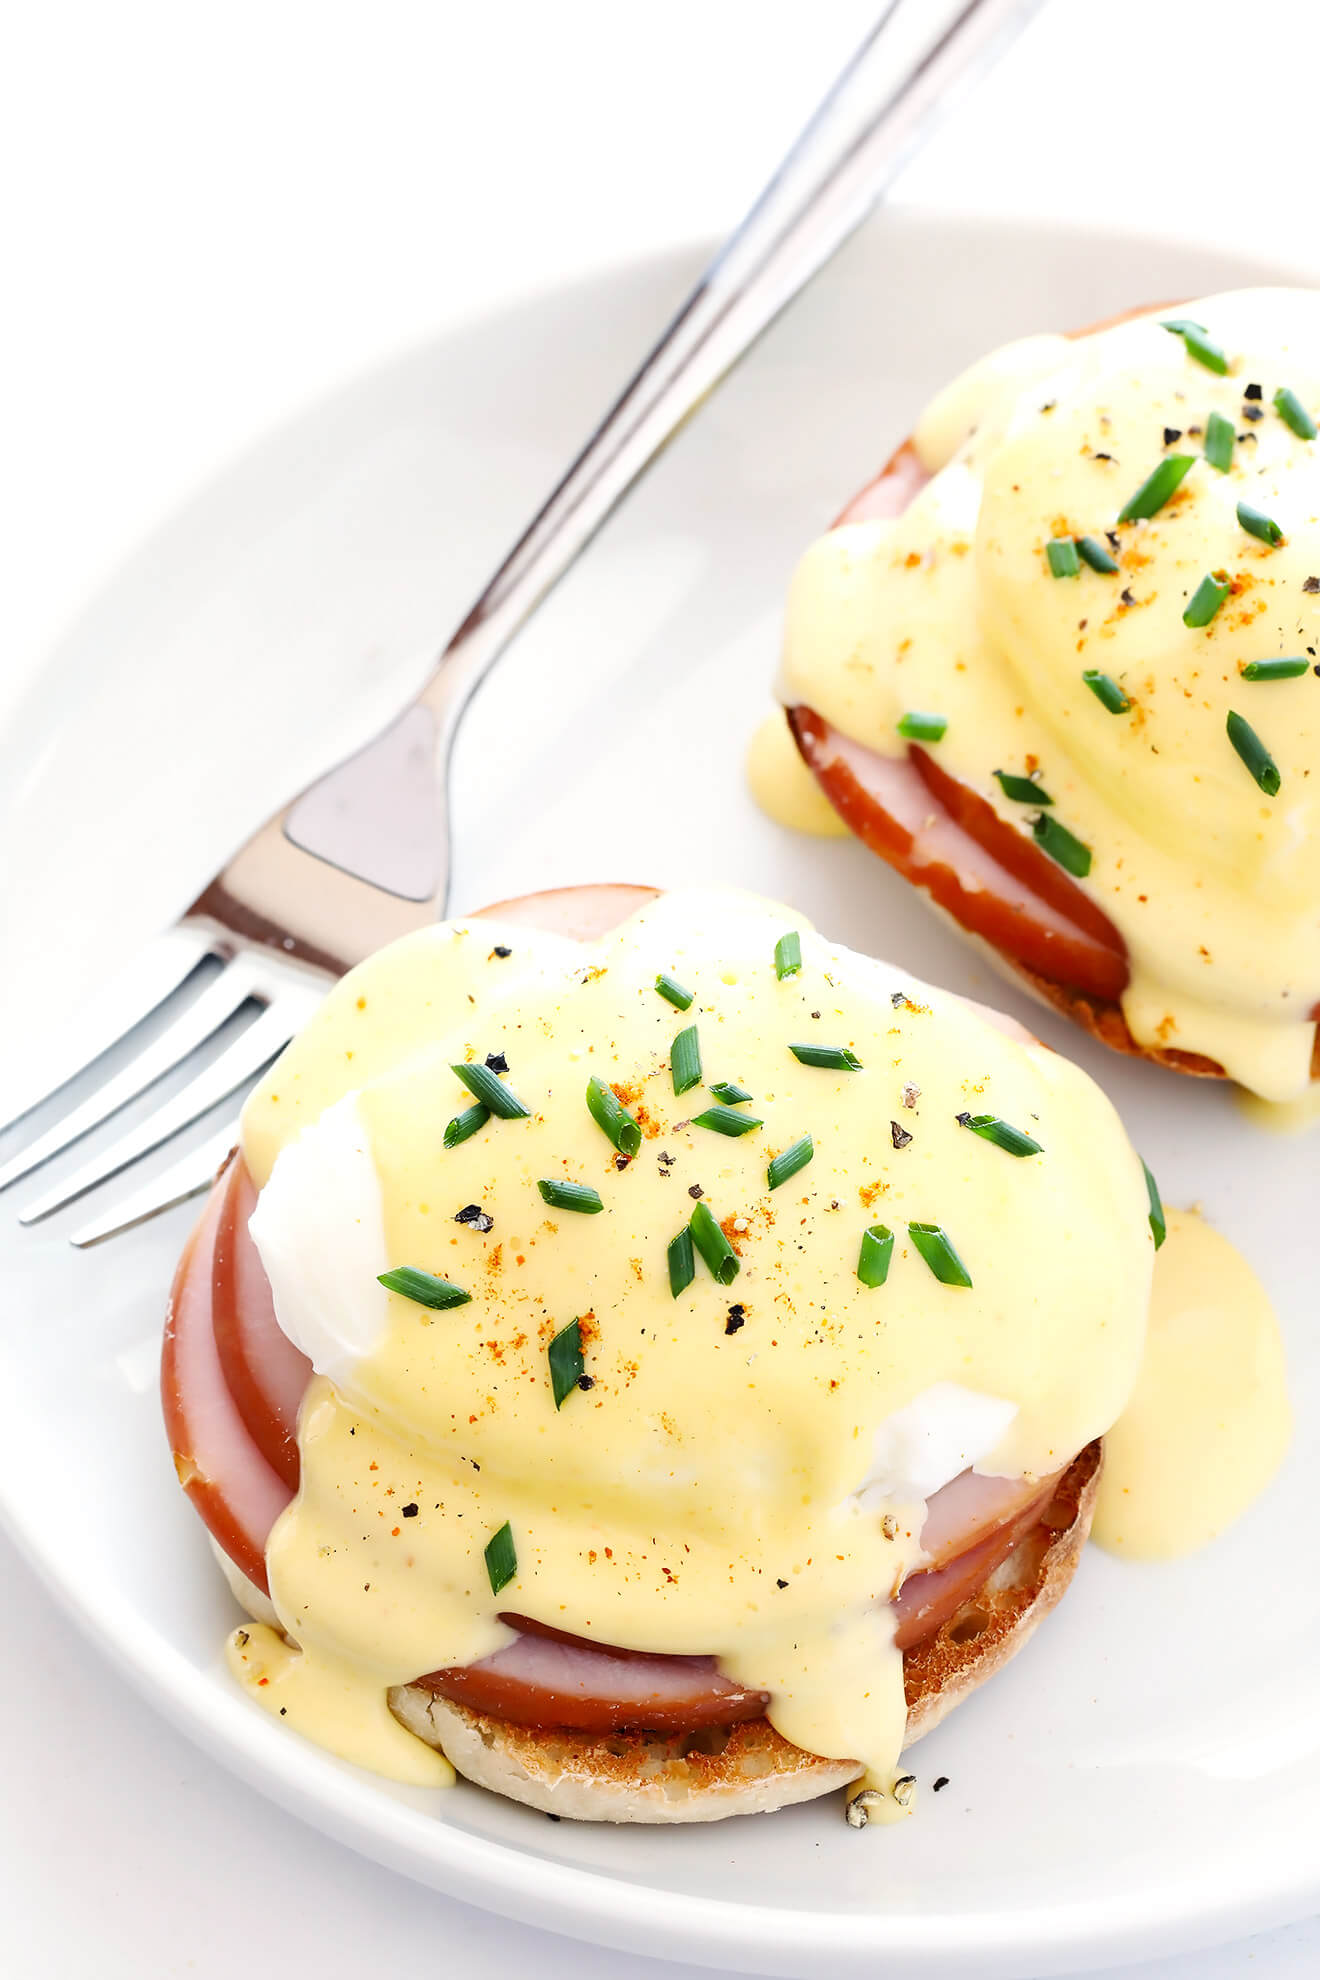 This Eggs Benedict recipe is the BEST. Super easy to make, super delicious, and the perfect savory addition to brunch! | gimmesomeoven.com